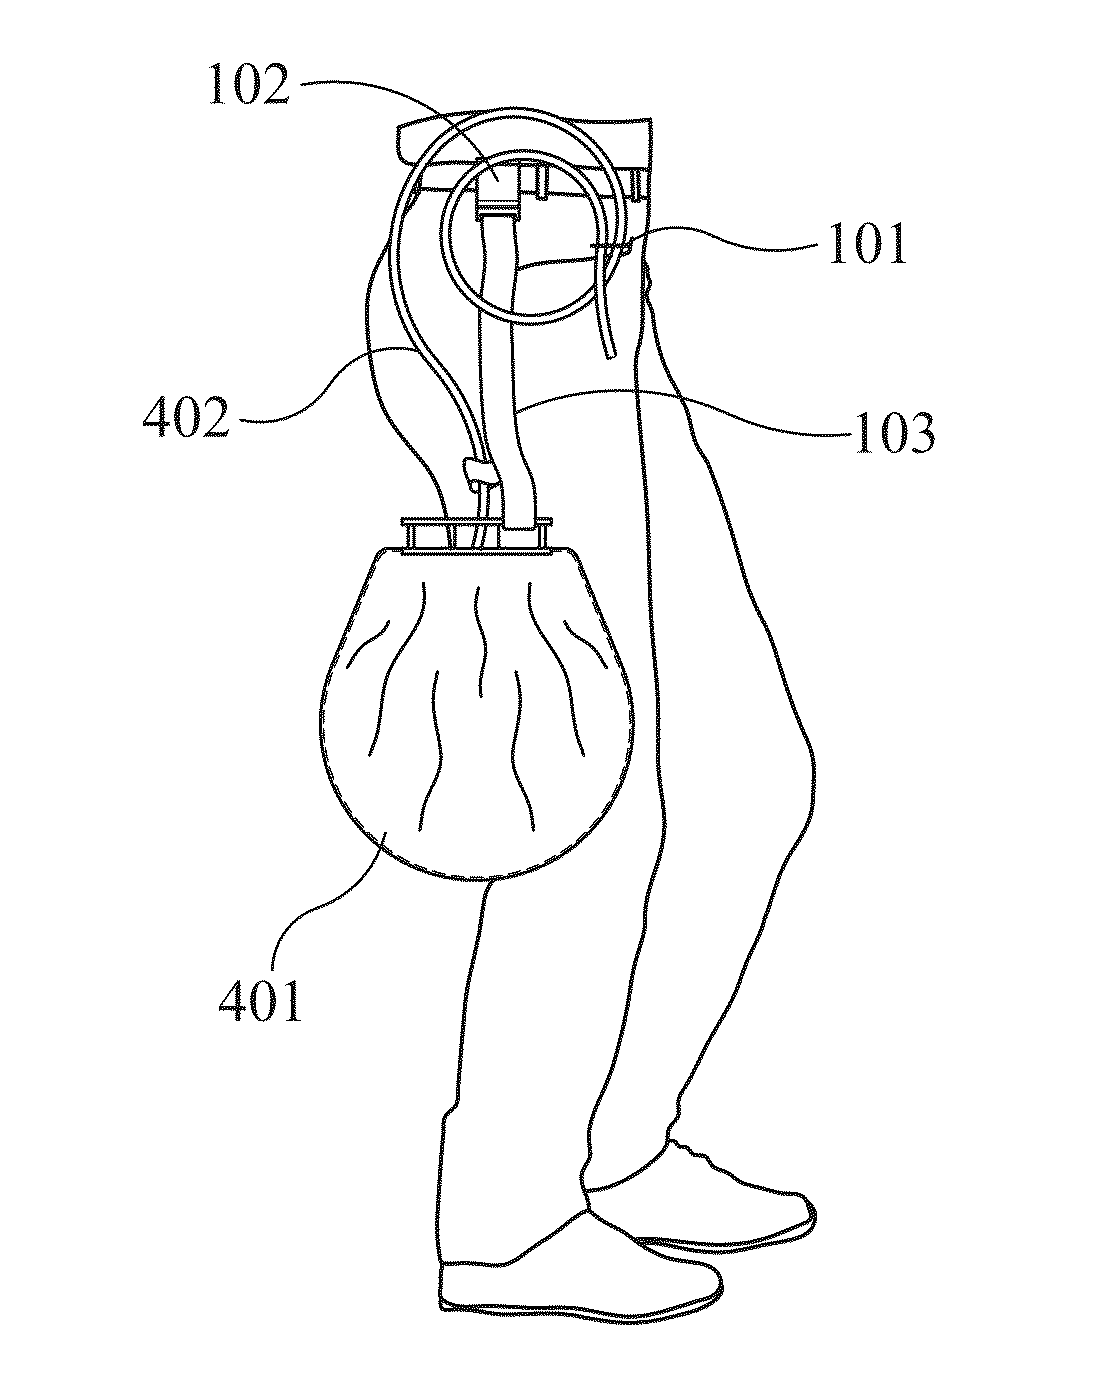 Catheter support systems and methods of use